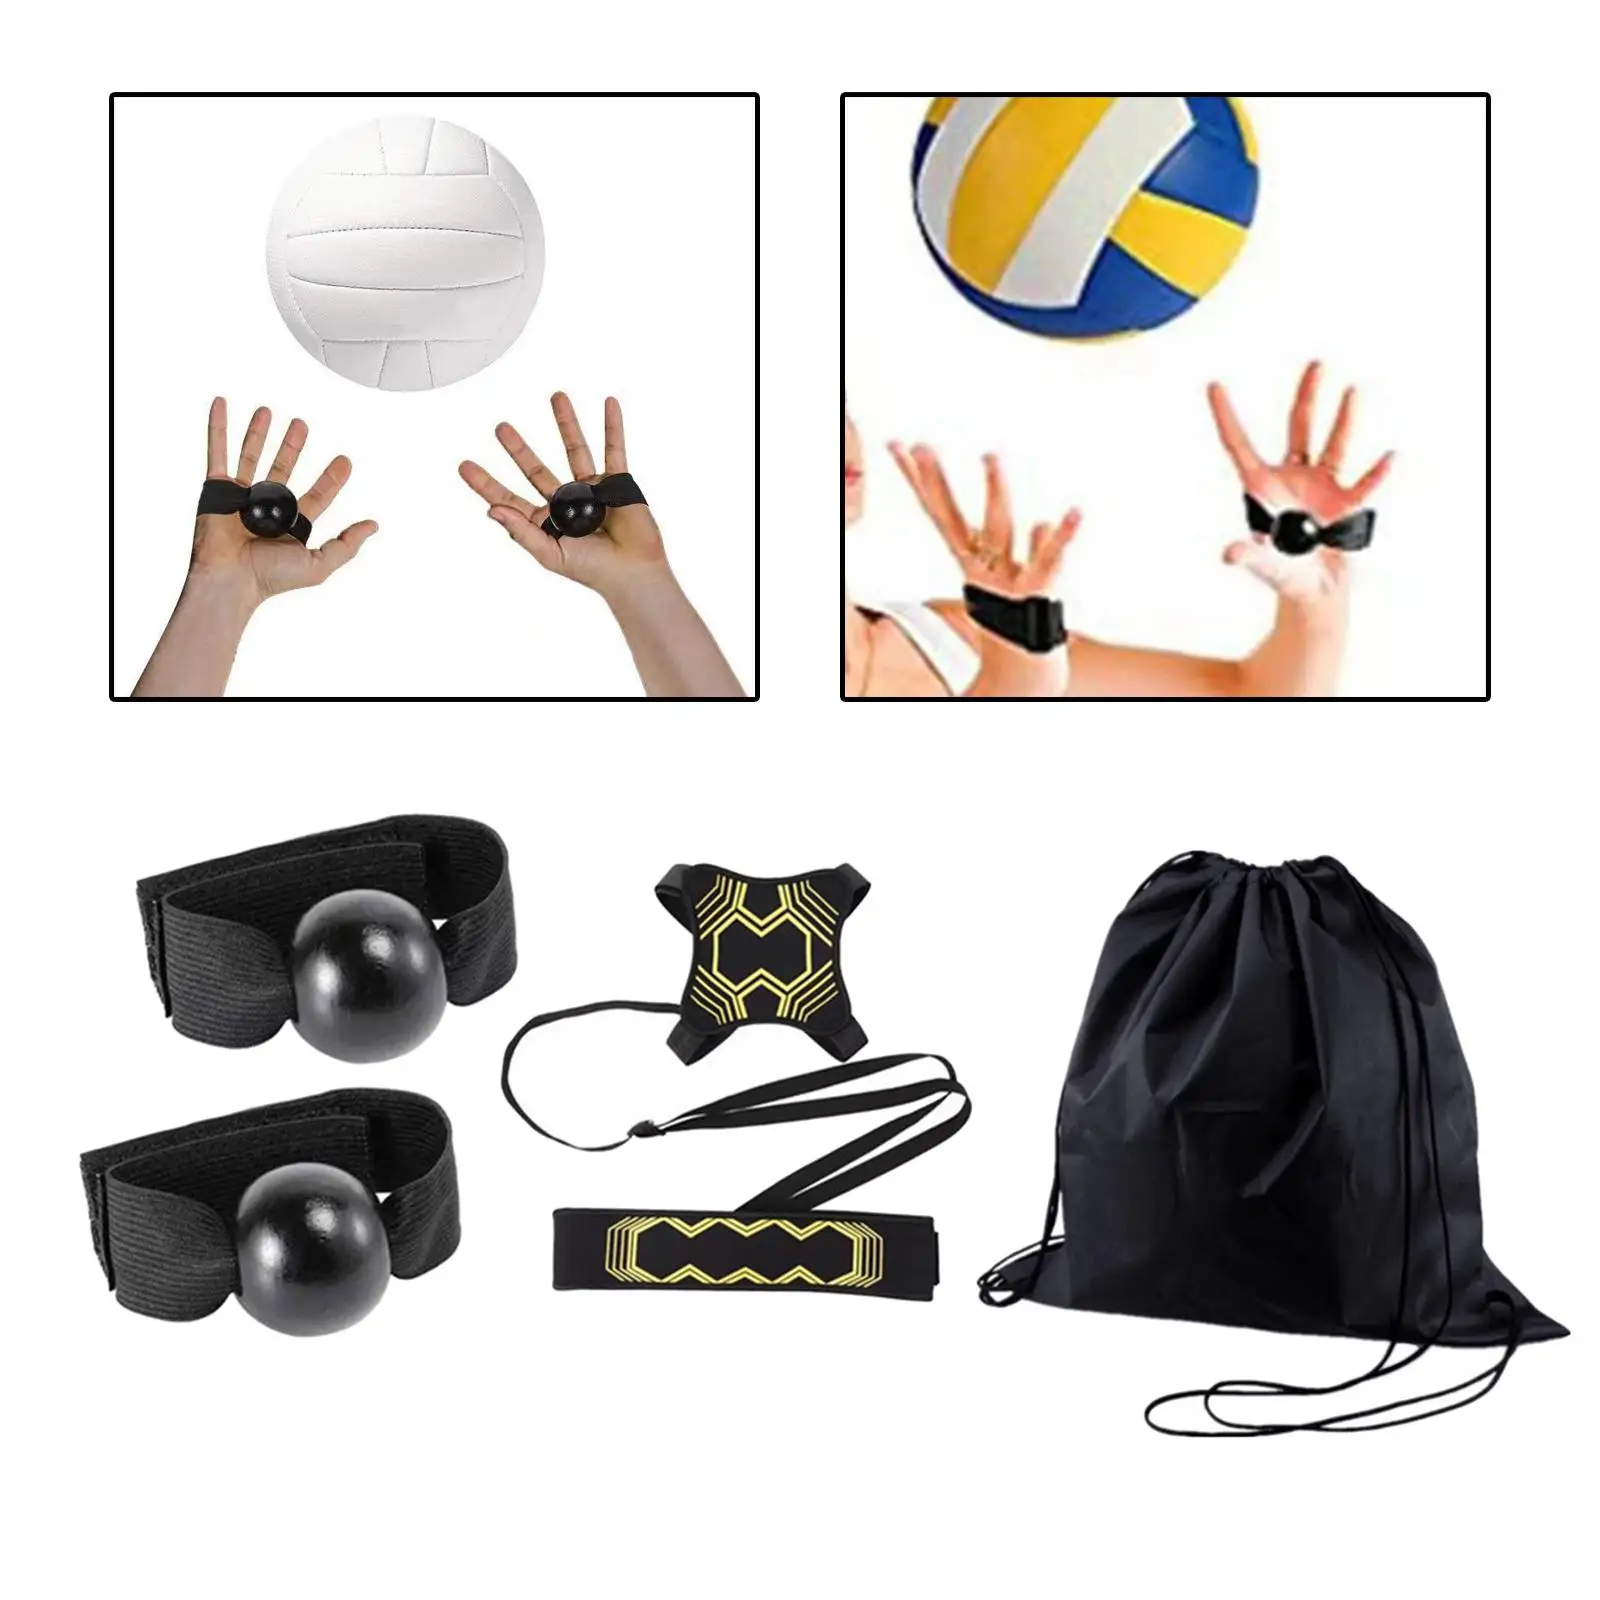 4x Volleyball Training Equipment Aid Volleyball Serve Trainer for Practicing